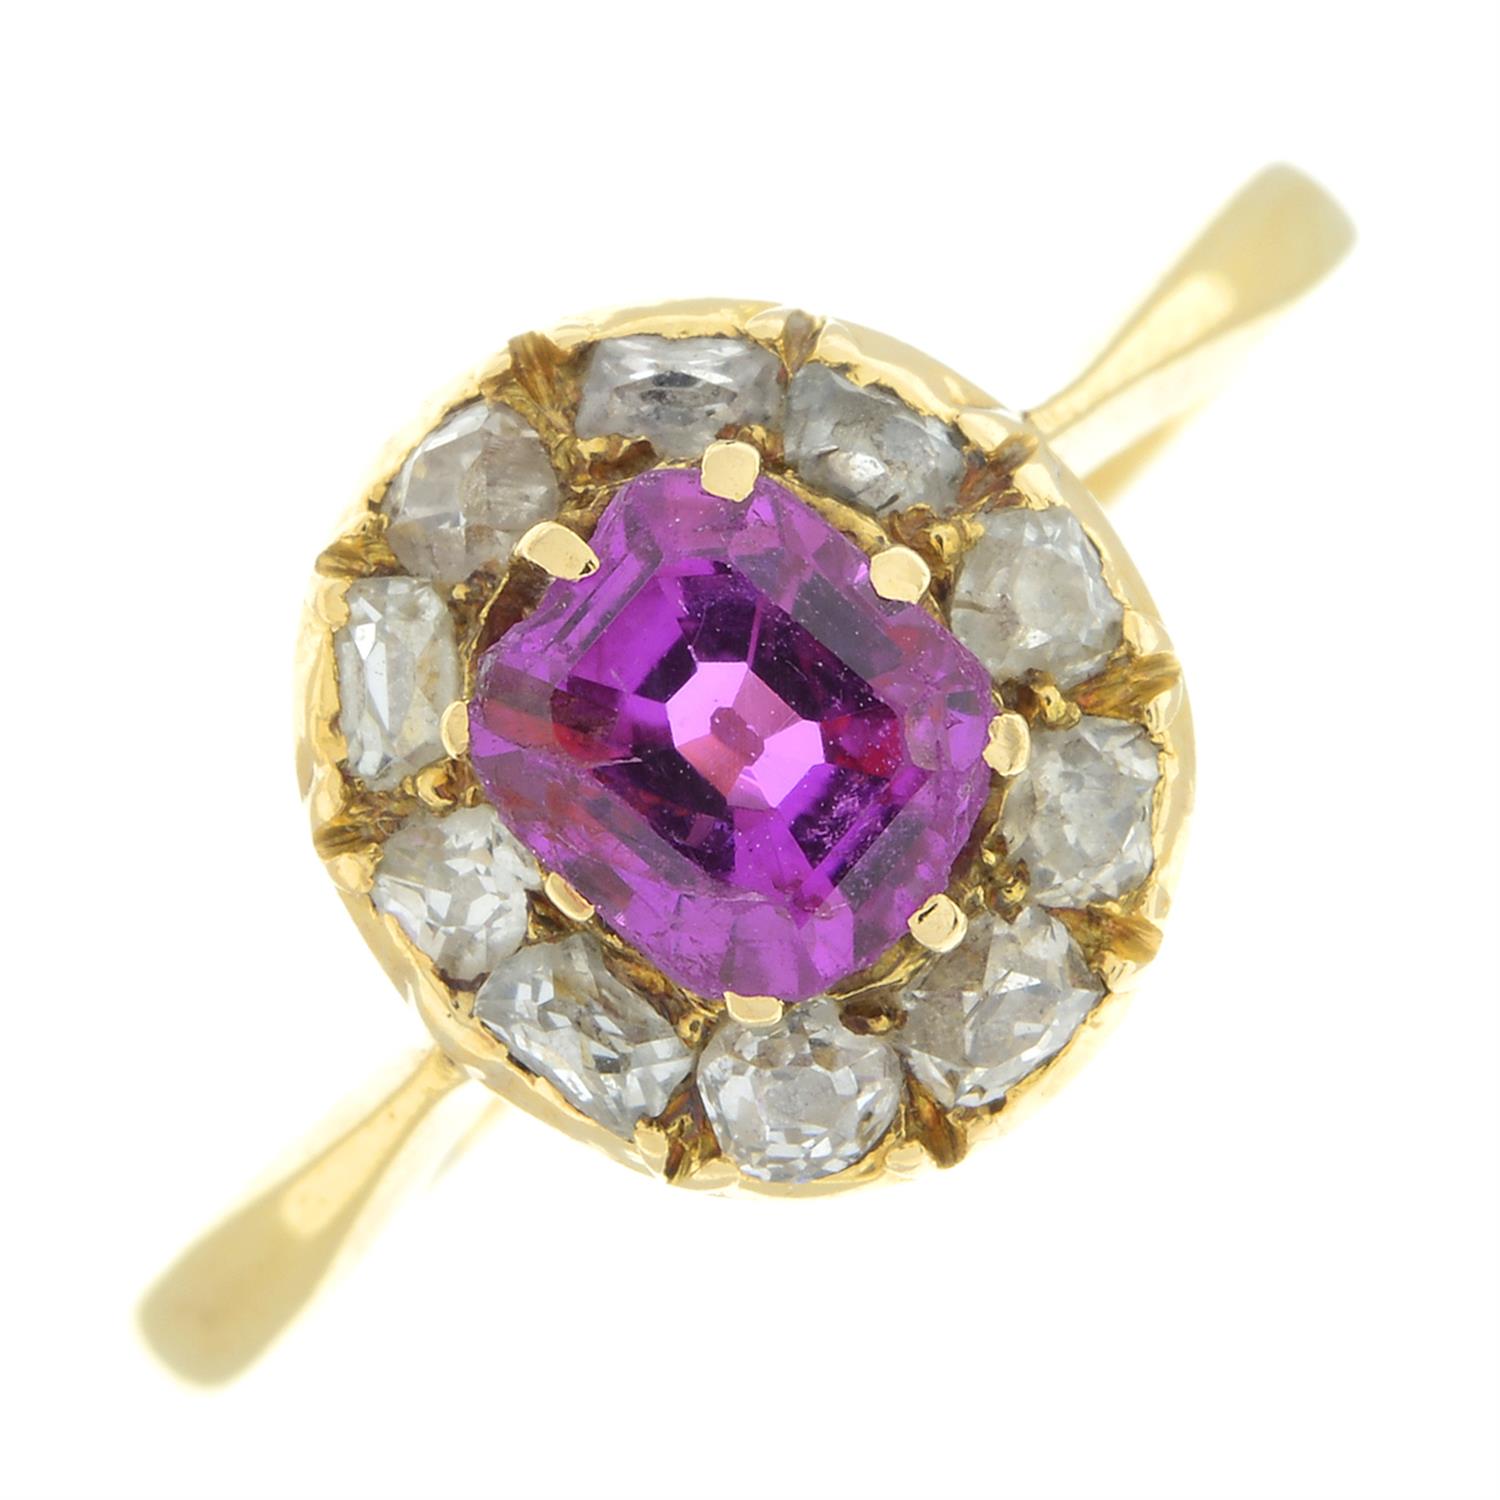 19th century gold Burmese pink sapphire and diamond ring - Image 2 of 5